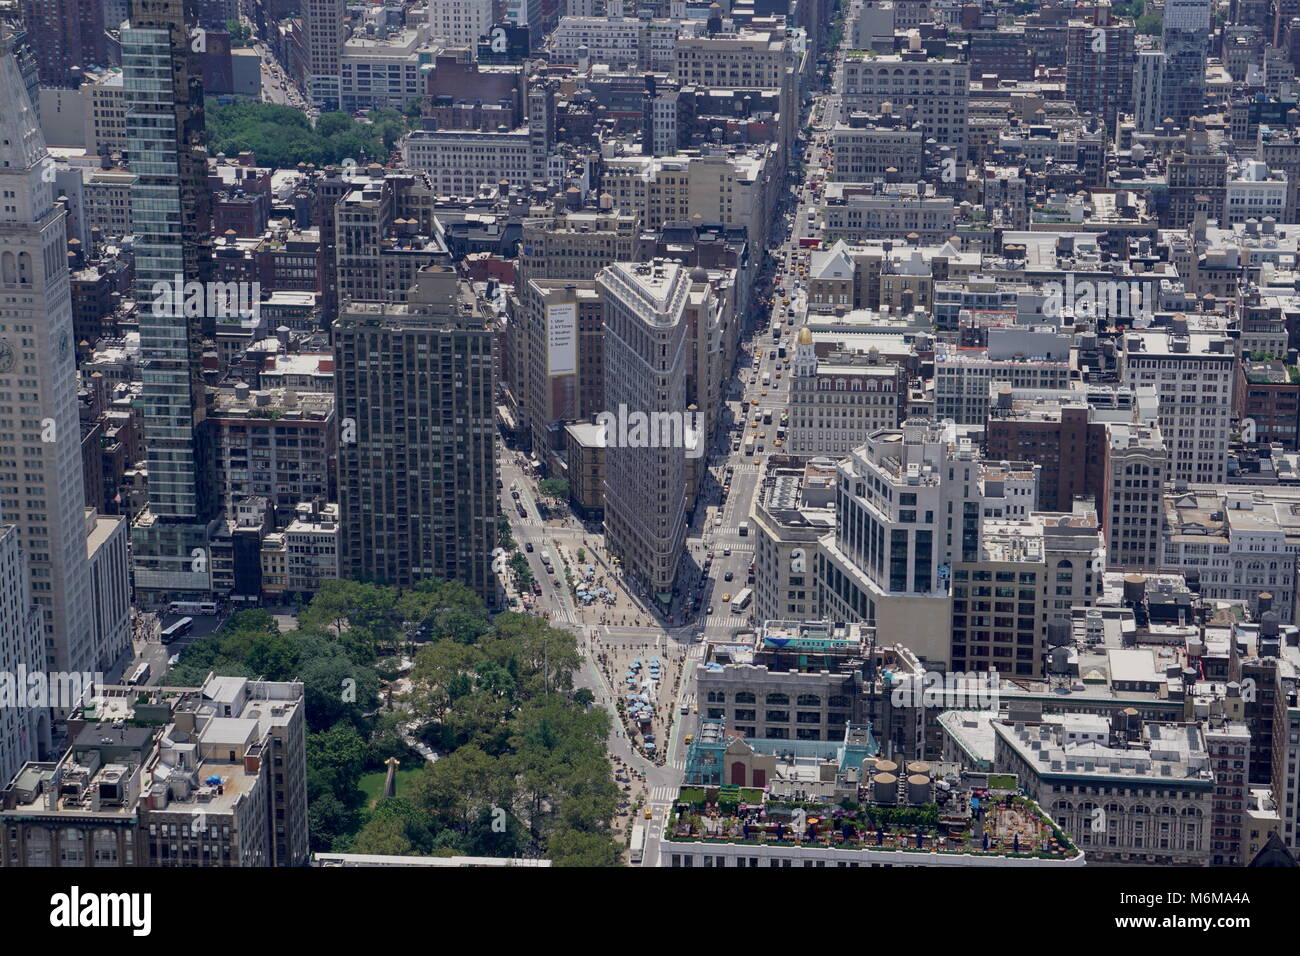 New York City, NY - July 12 2016: Wide aerial rooftop view of the famous flatiron building on Broadway in midtown Manhattan on a clear summer day Stock Photo